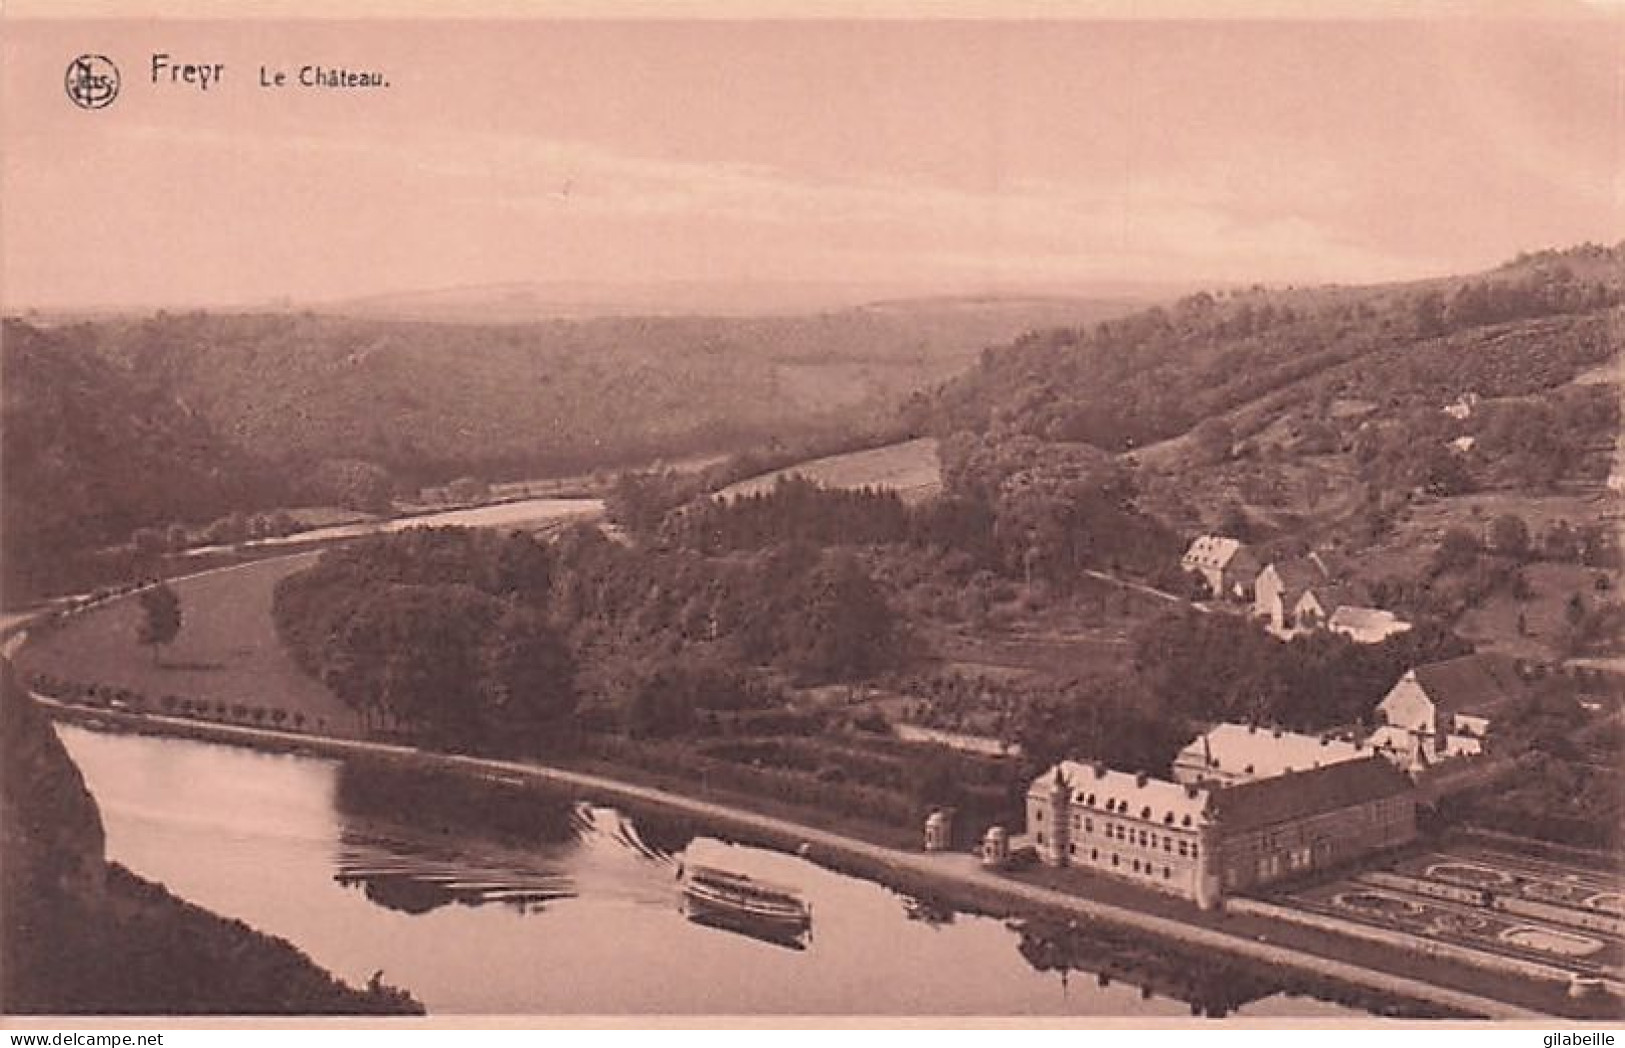 Hastiere -  FREYR - Le Chateau - Hastiere